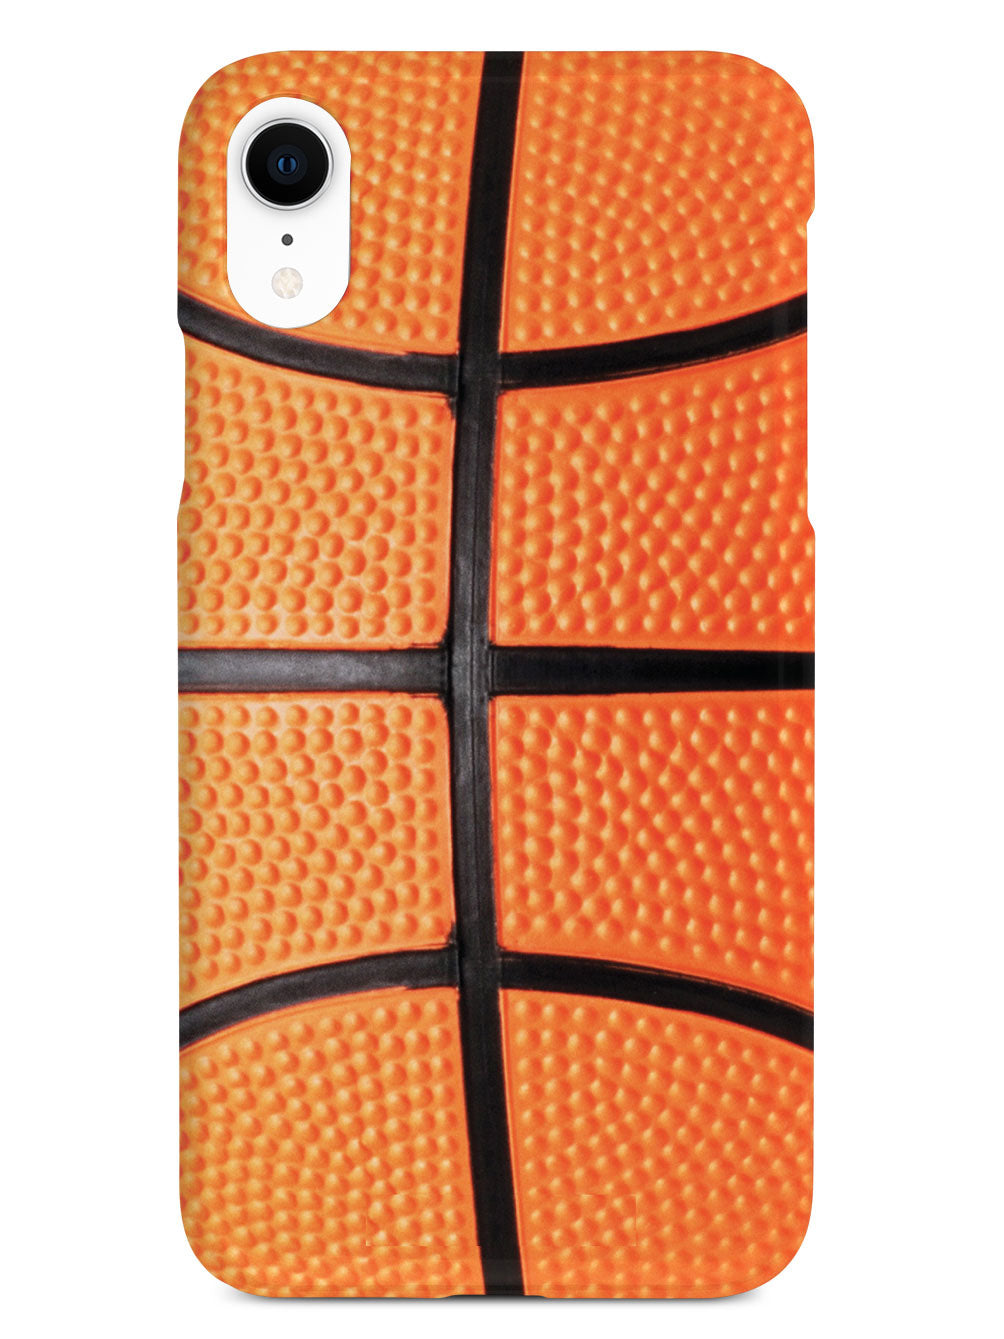 Detailed Textured Basketball Case